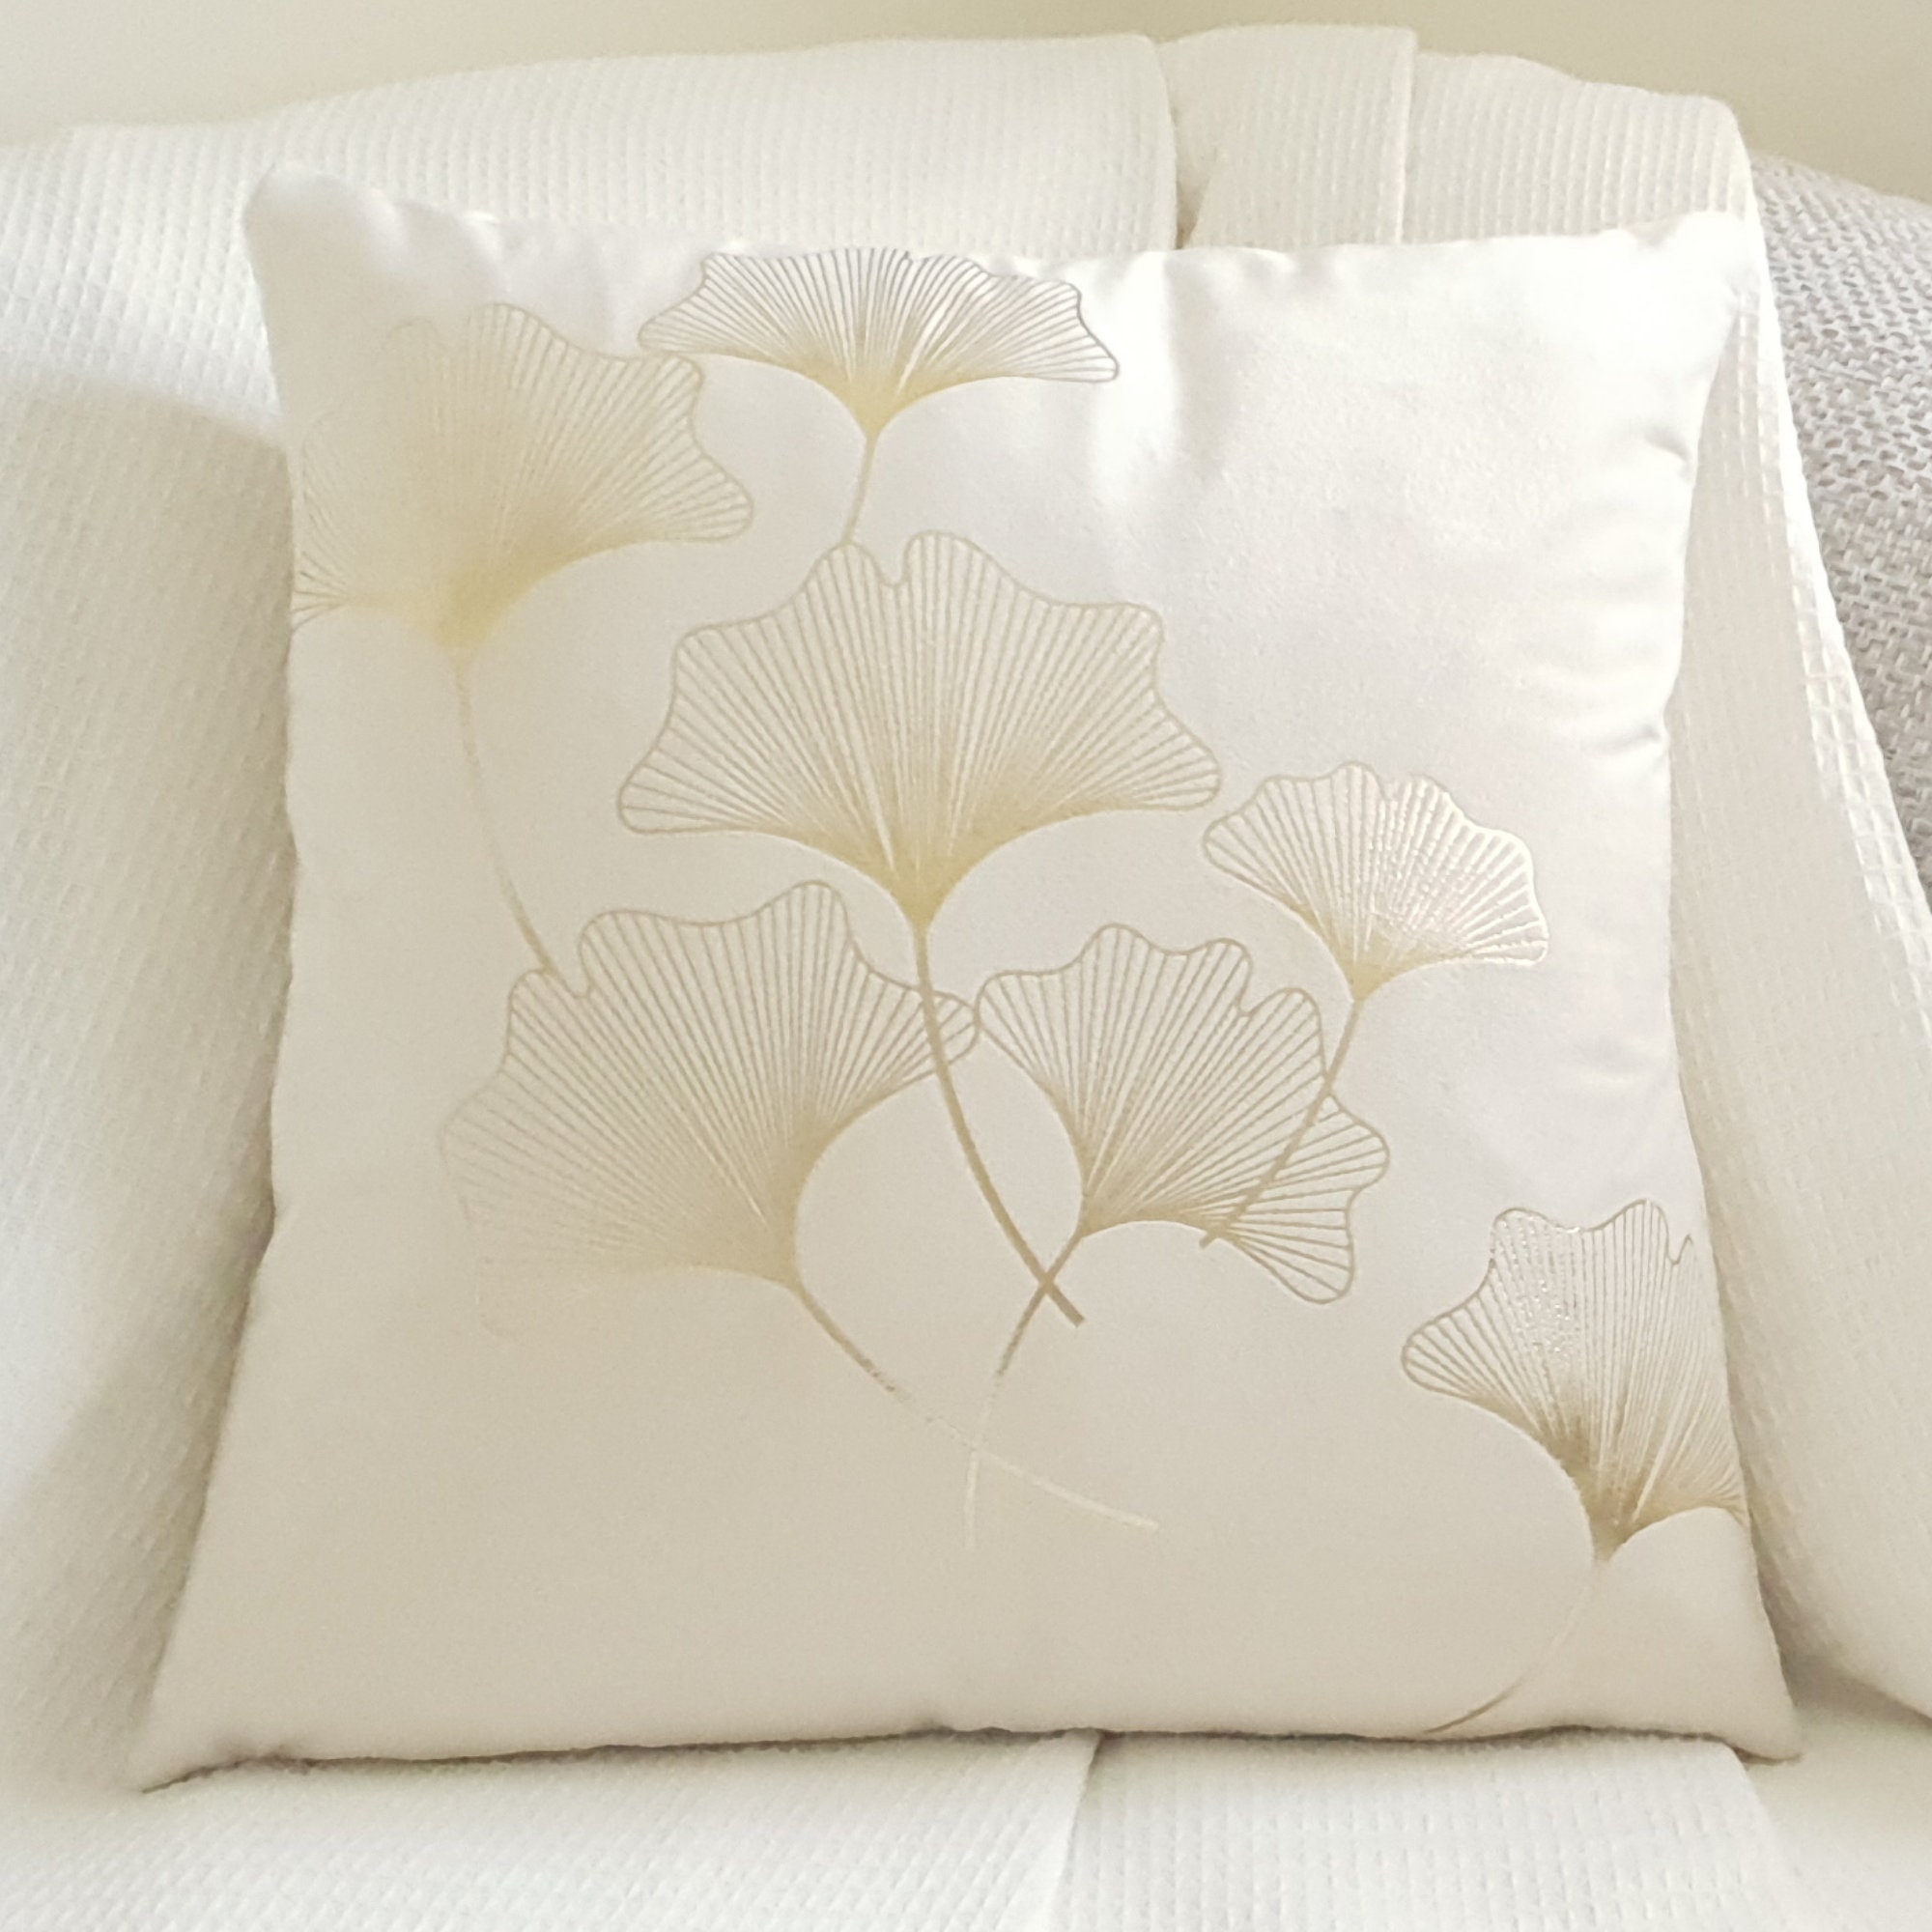 Luxury Cream & Gold Scatter Cushion Covers 18x18 Throw Pillow - Etsy UK